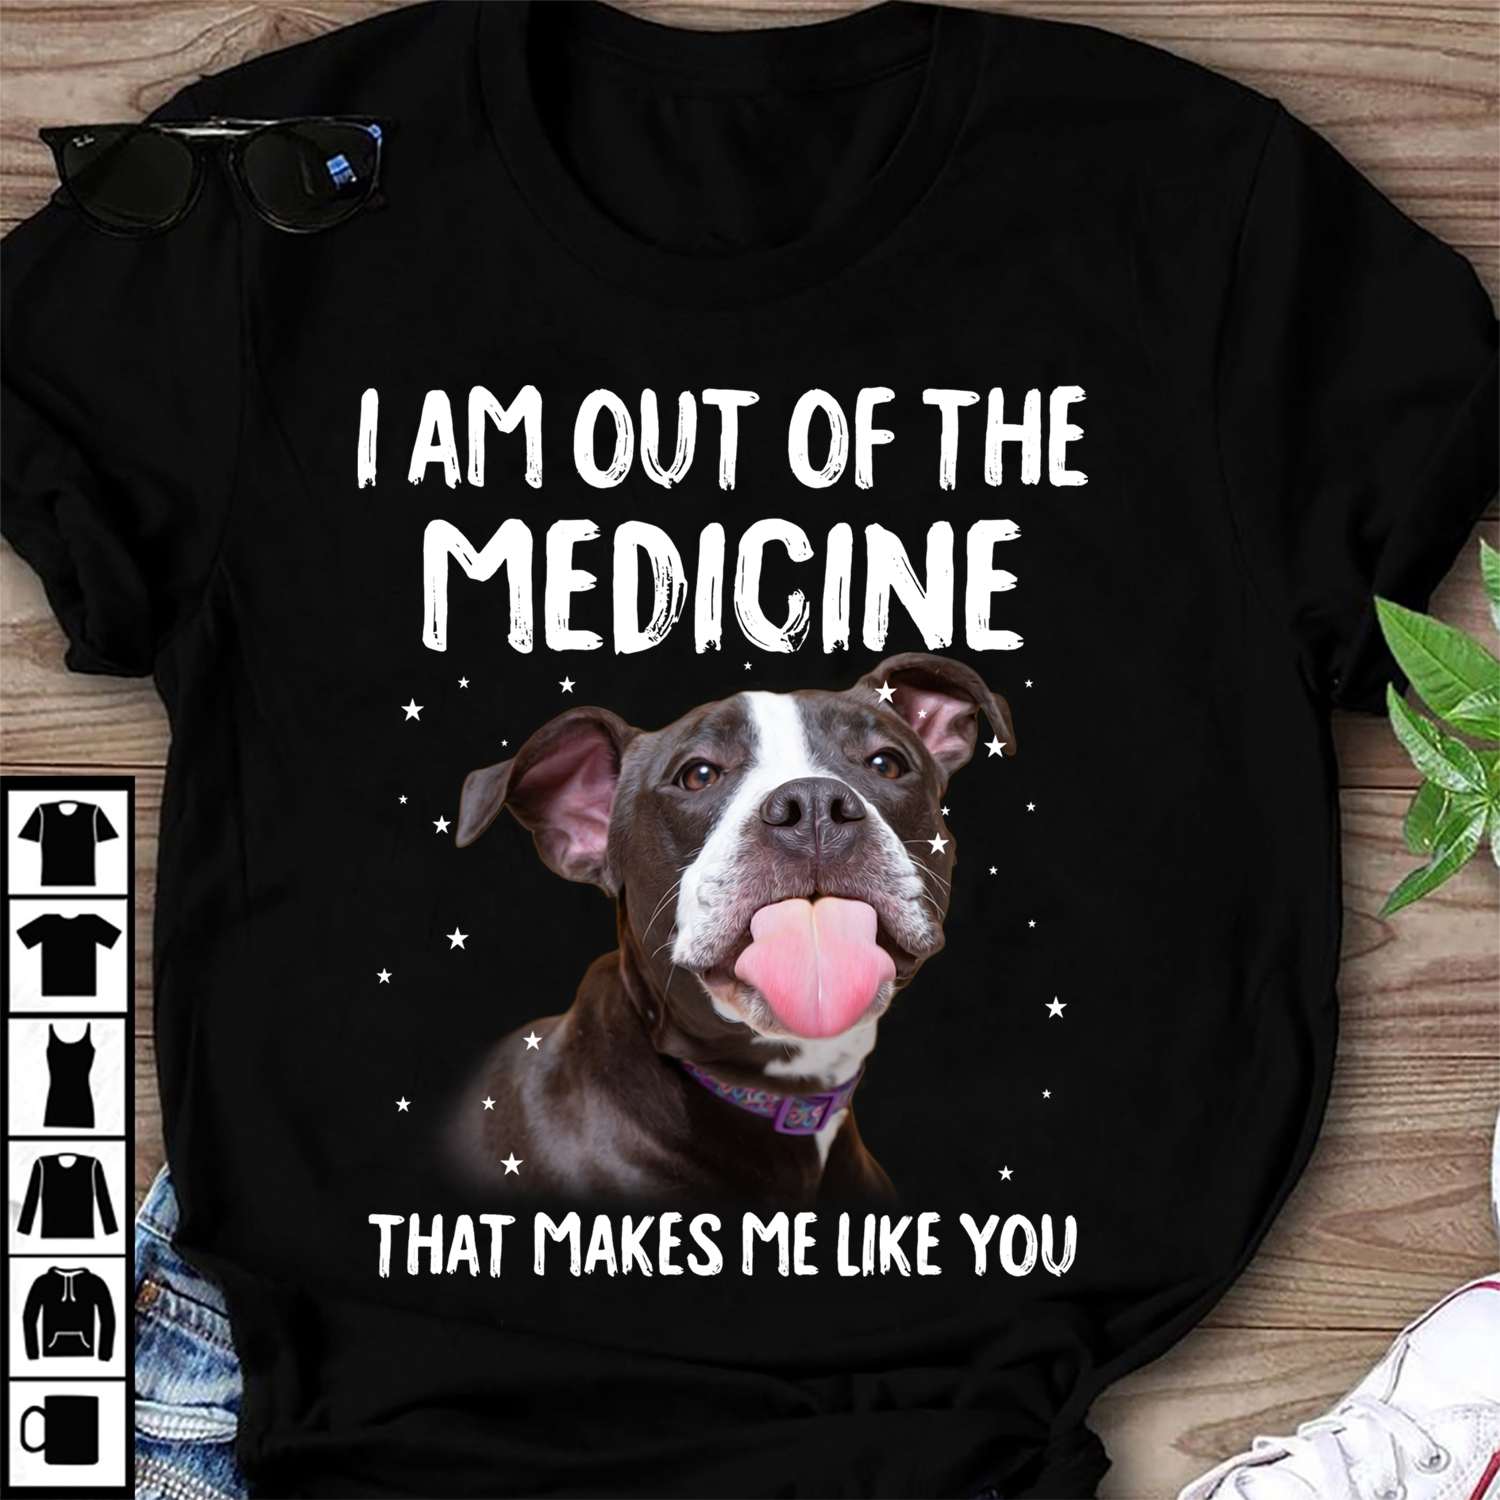 Staffordshire Bull Terrier Dog – I am out of the medicine that makes me like you